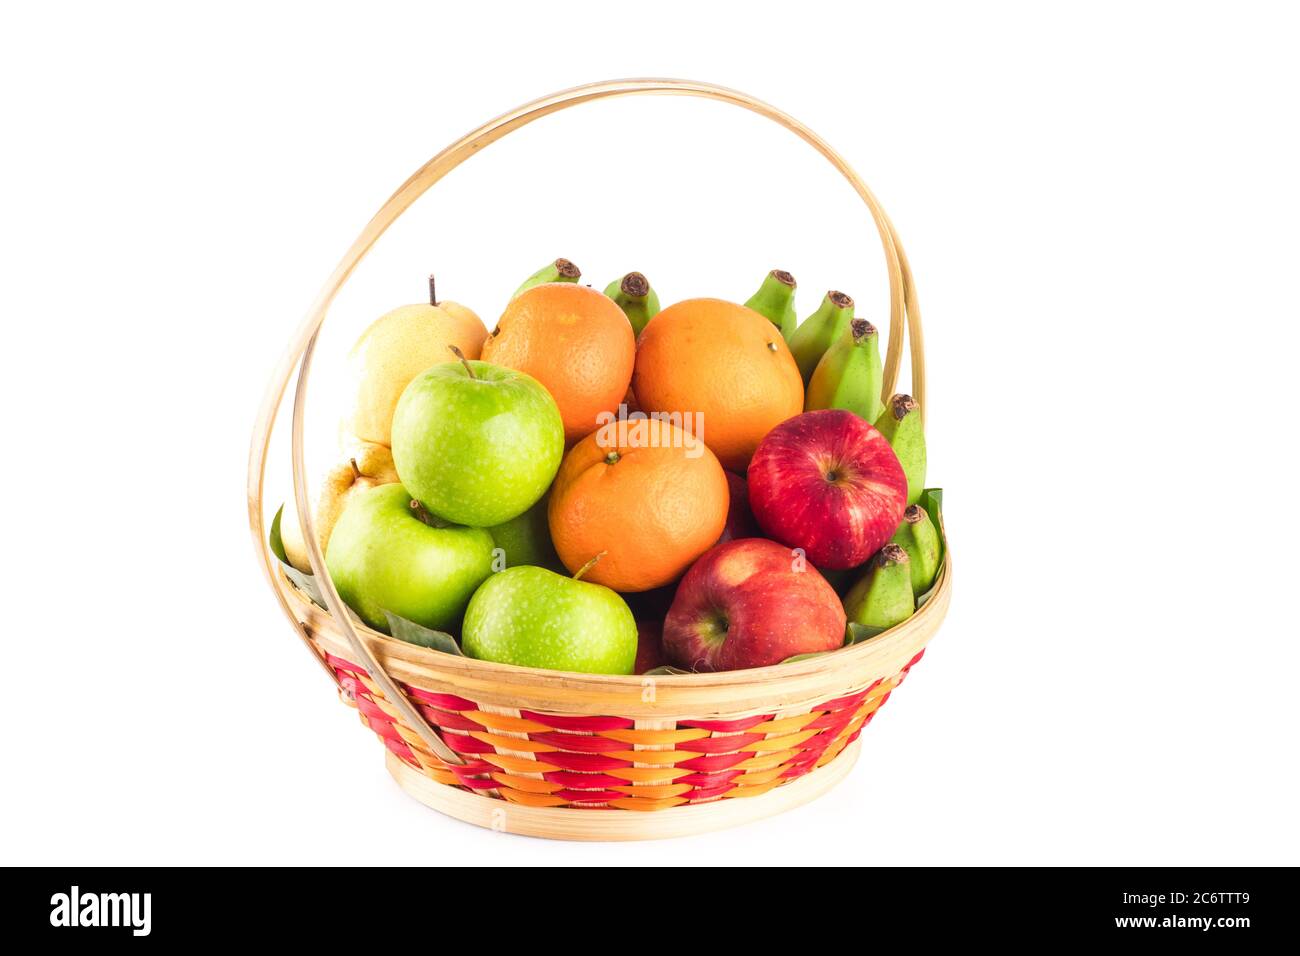 orange, Chinese pear, banana, red apple and green apple in wicker basket on white background fruit health food isolated Stock Photo